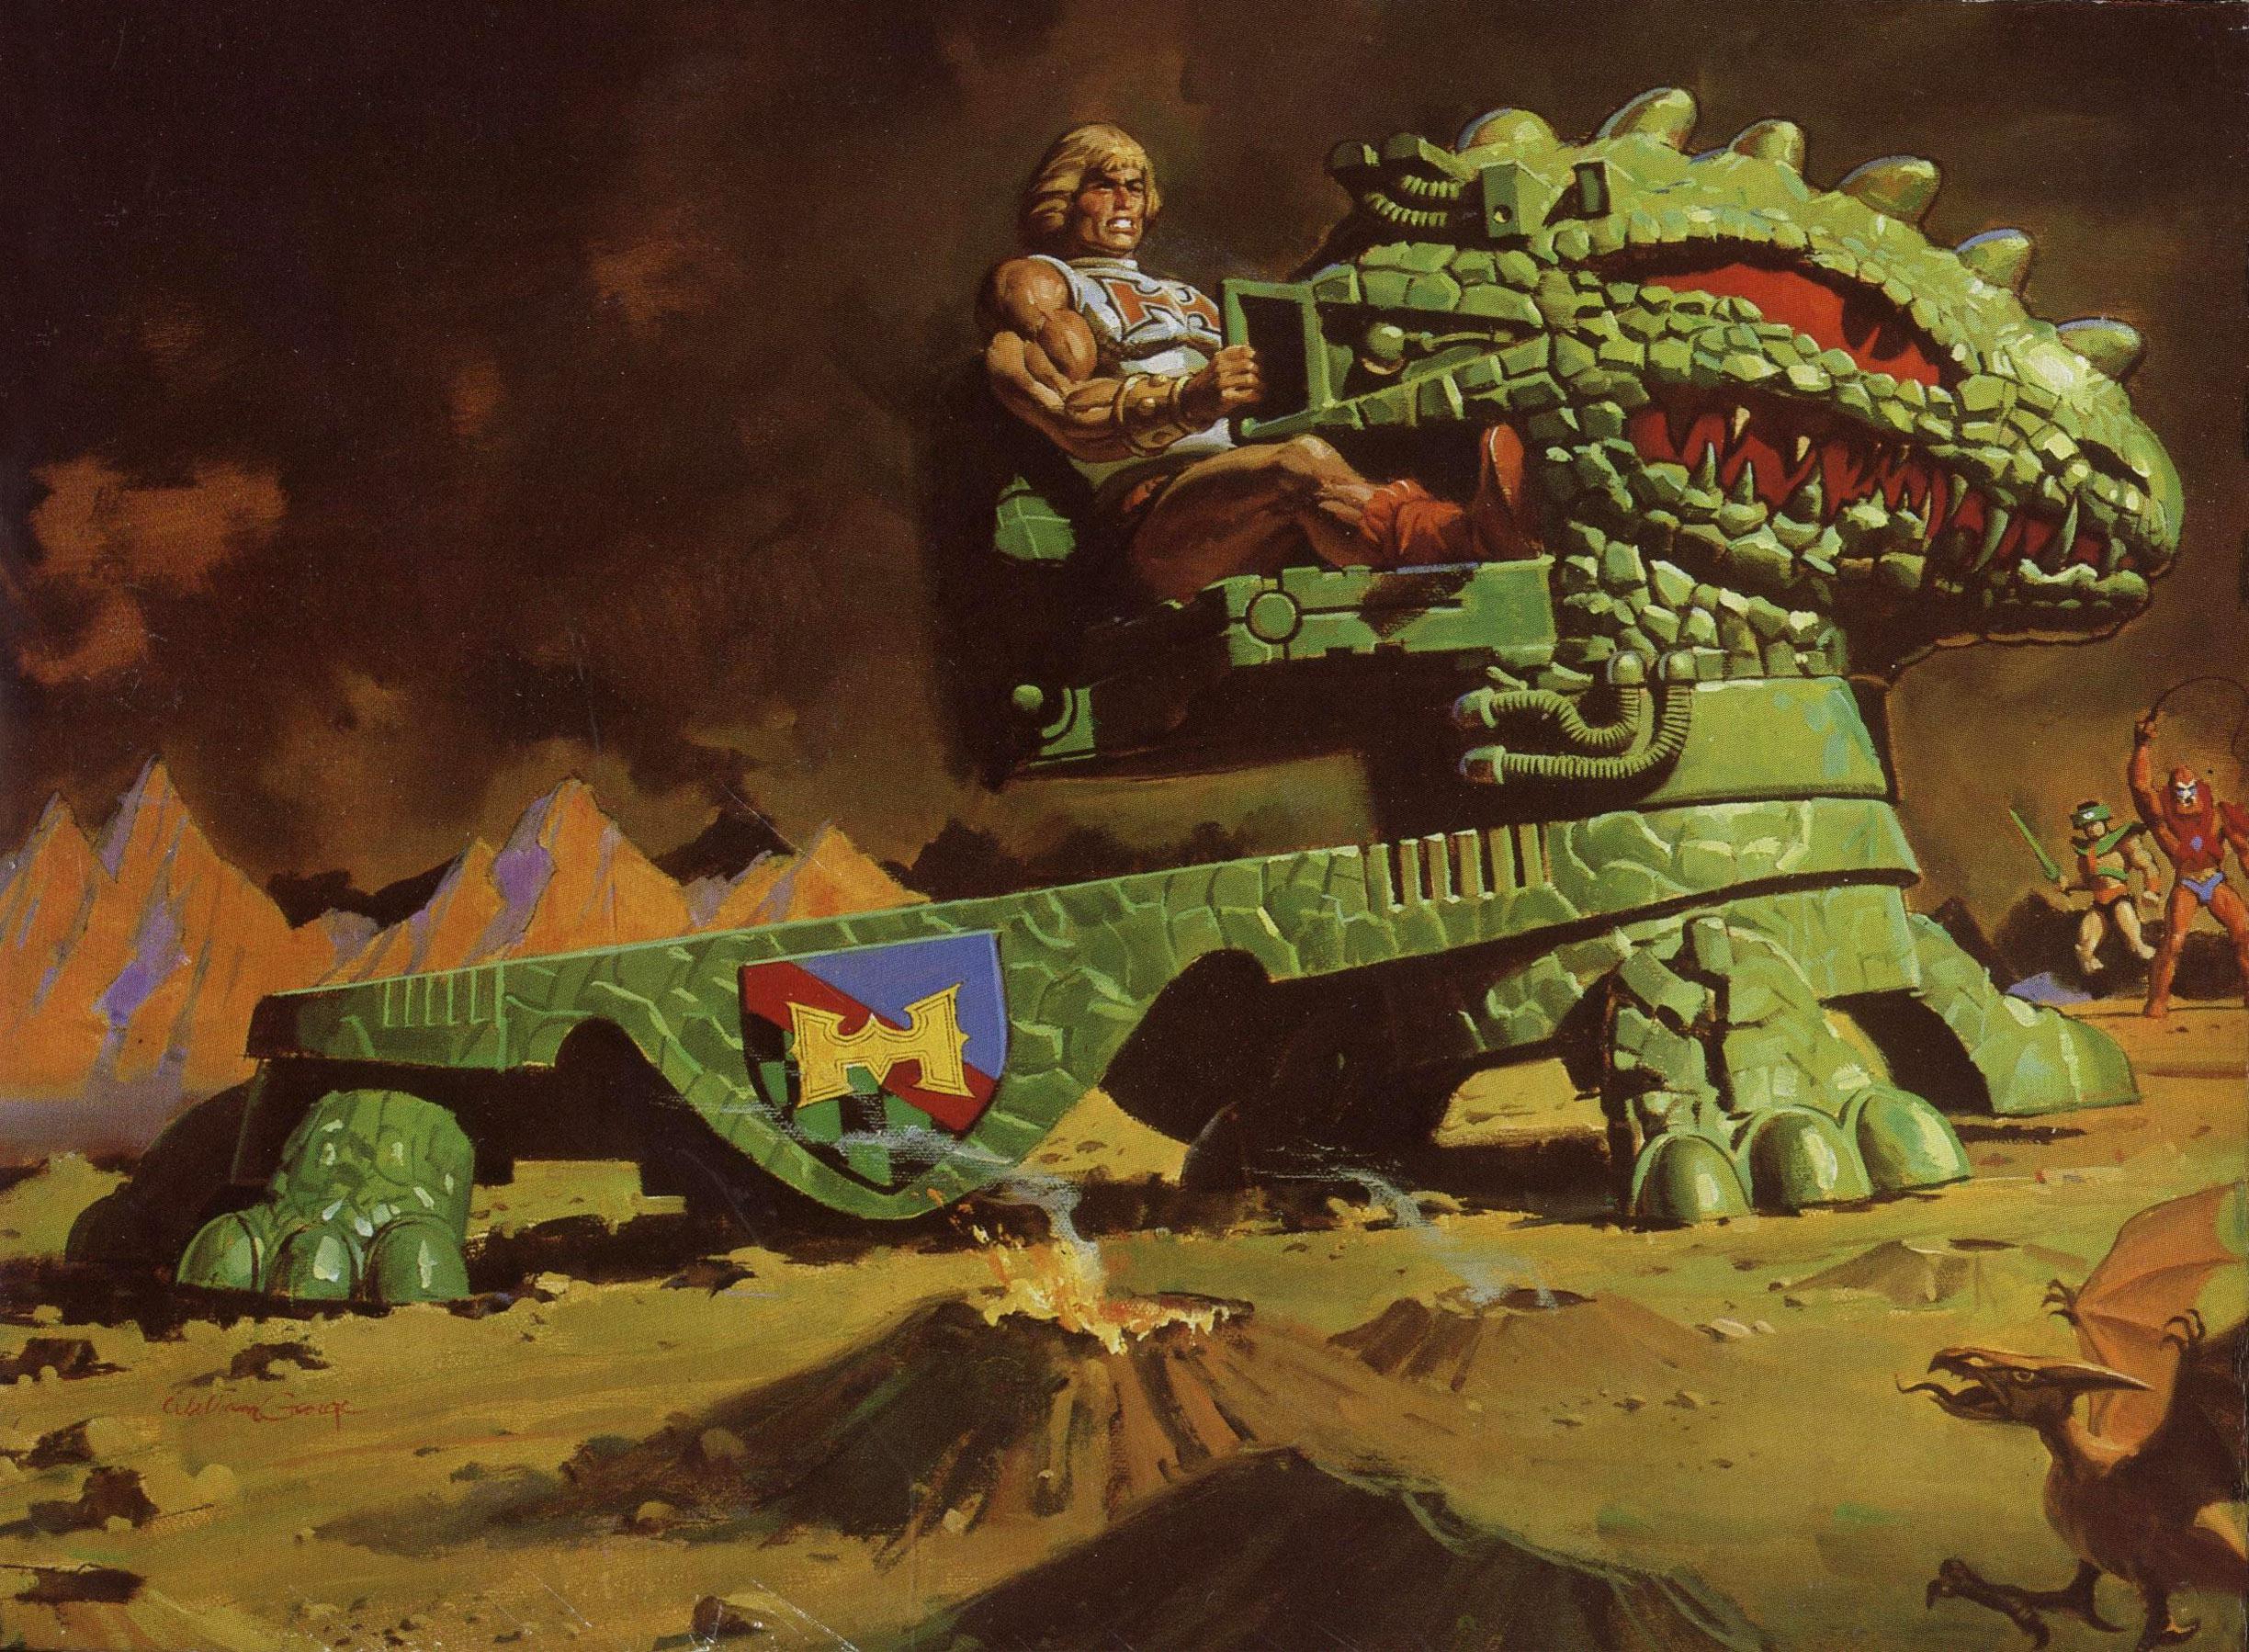 Dragon walker he man - (#117012) - High Quality and Resolution ...